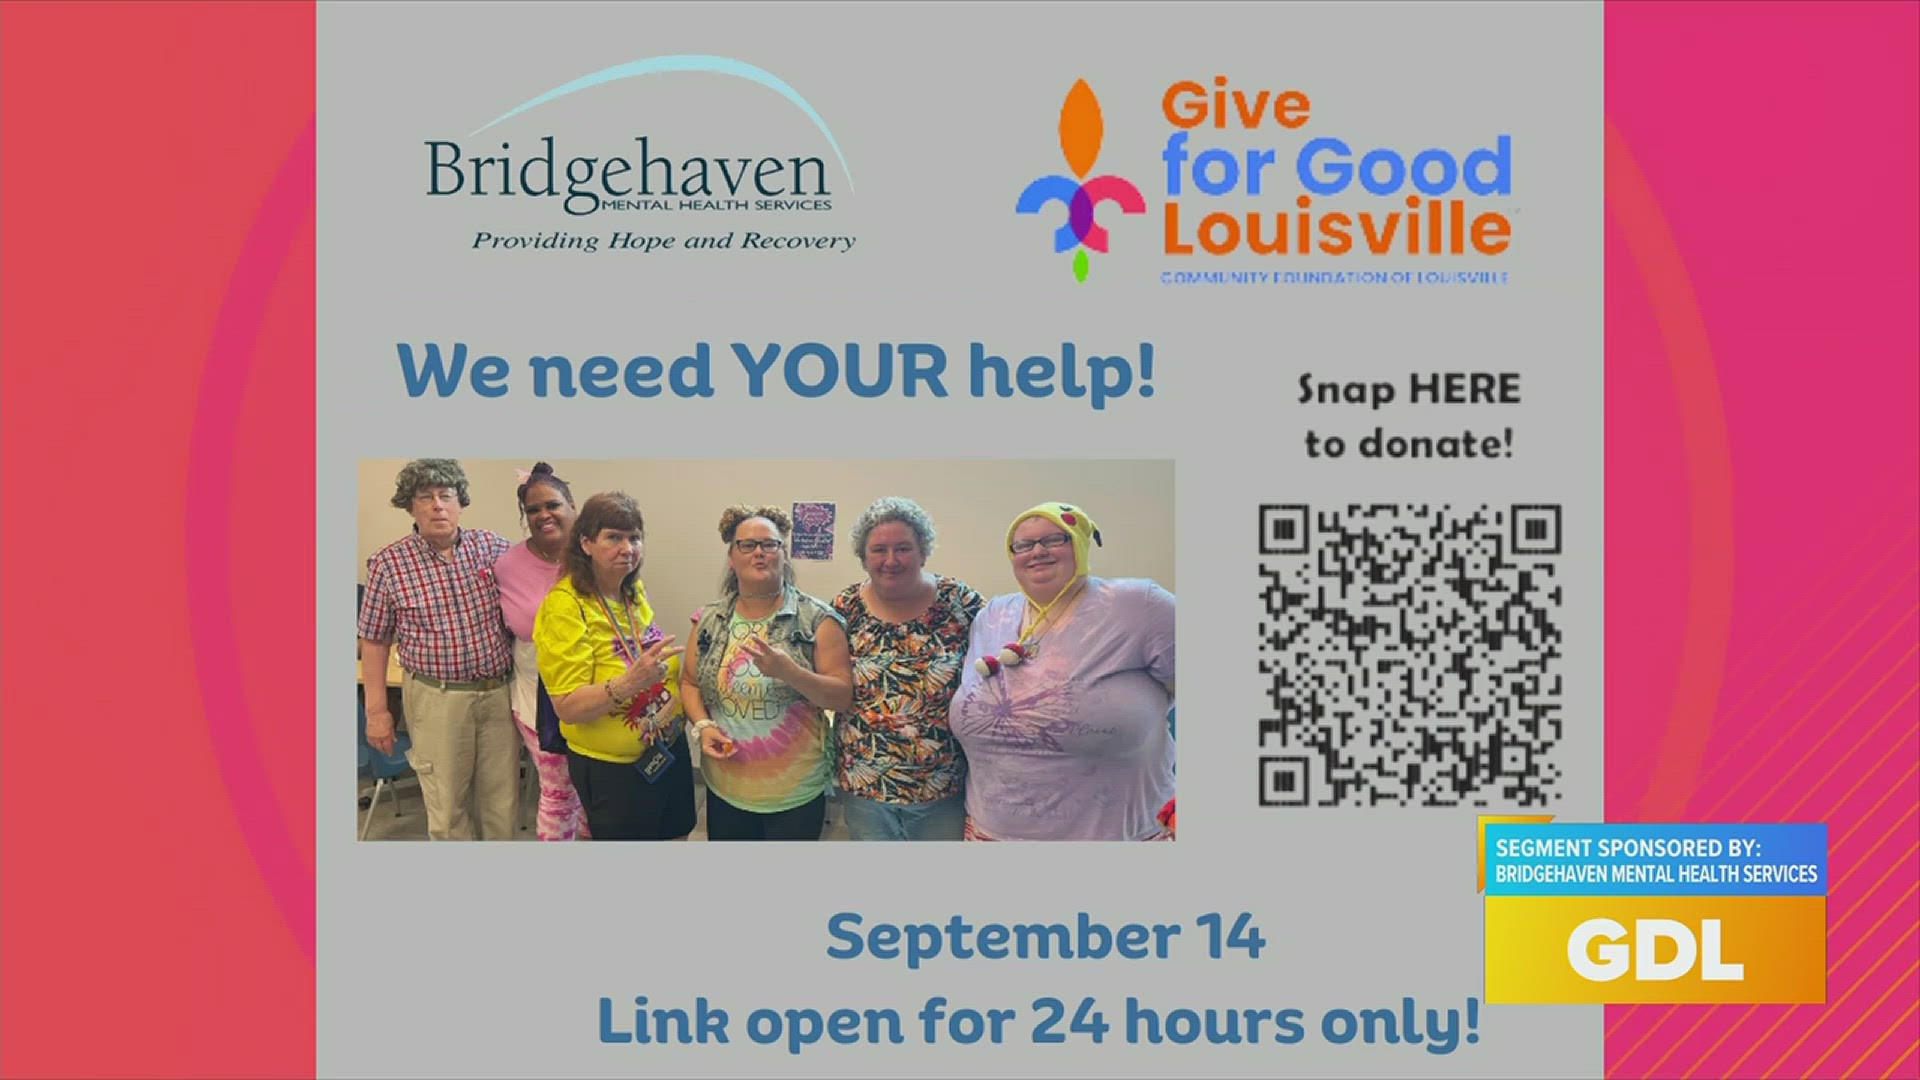 Learn more at bridgehaven.org